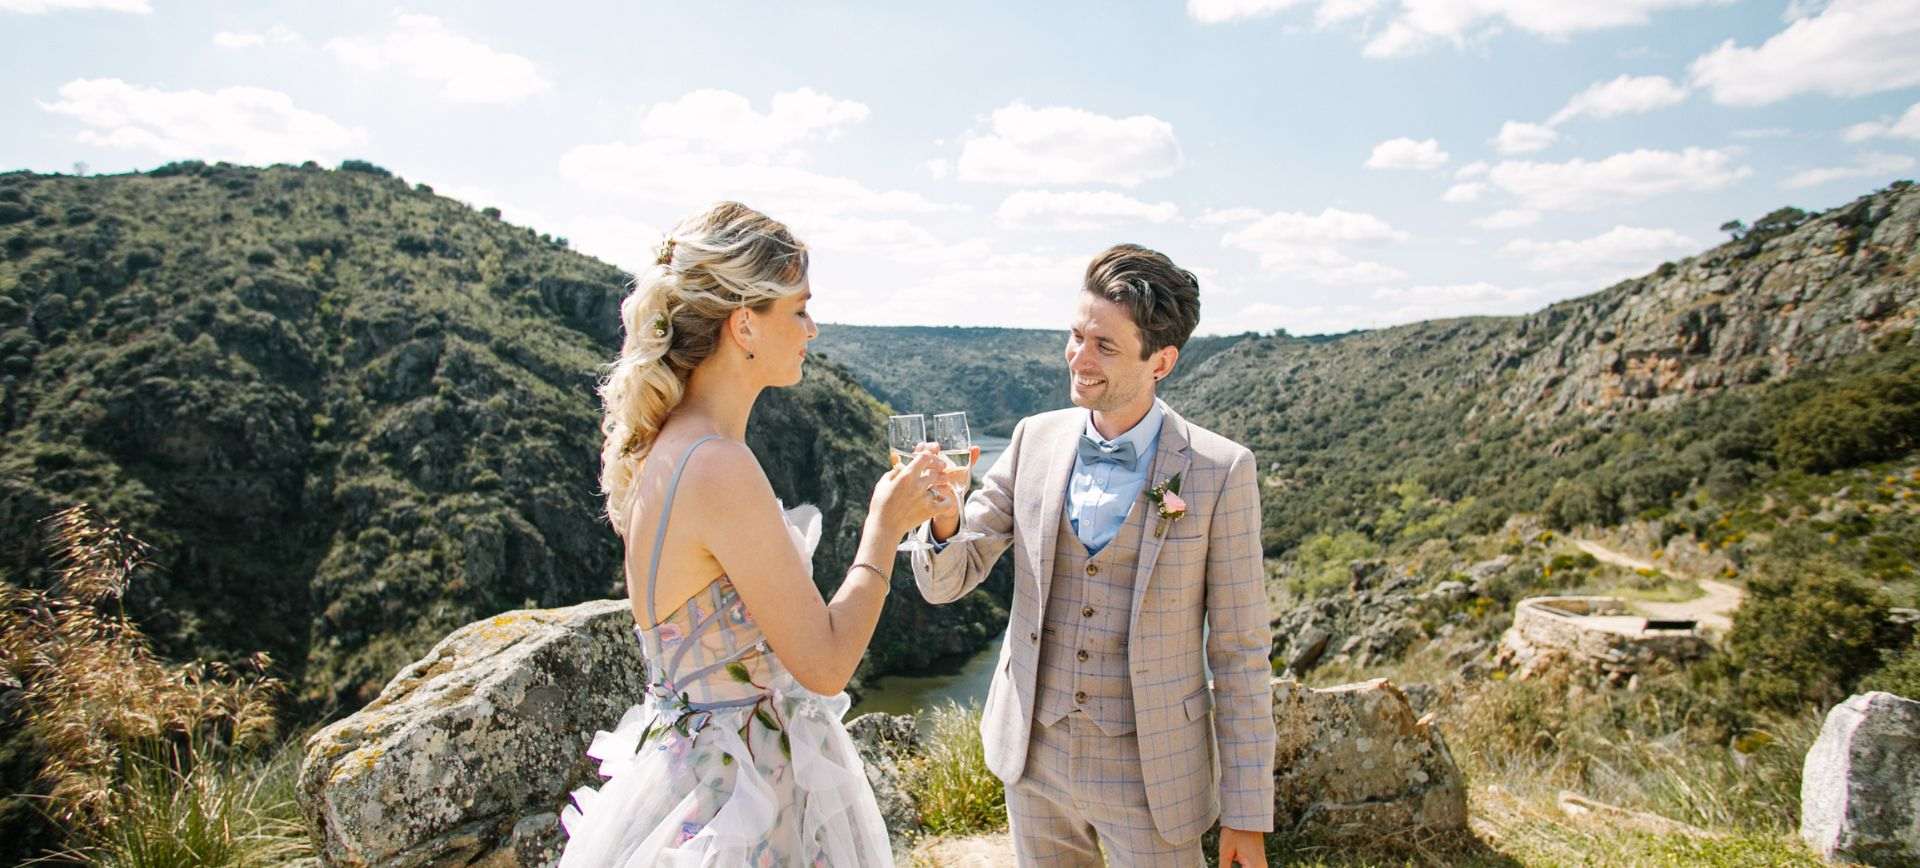 Meadows and Hills Elopement in Spain